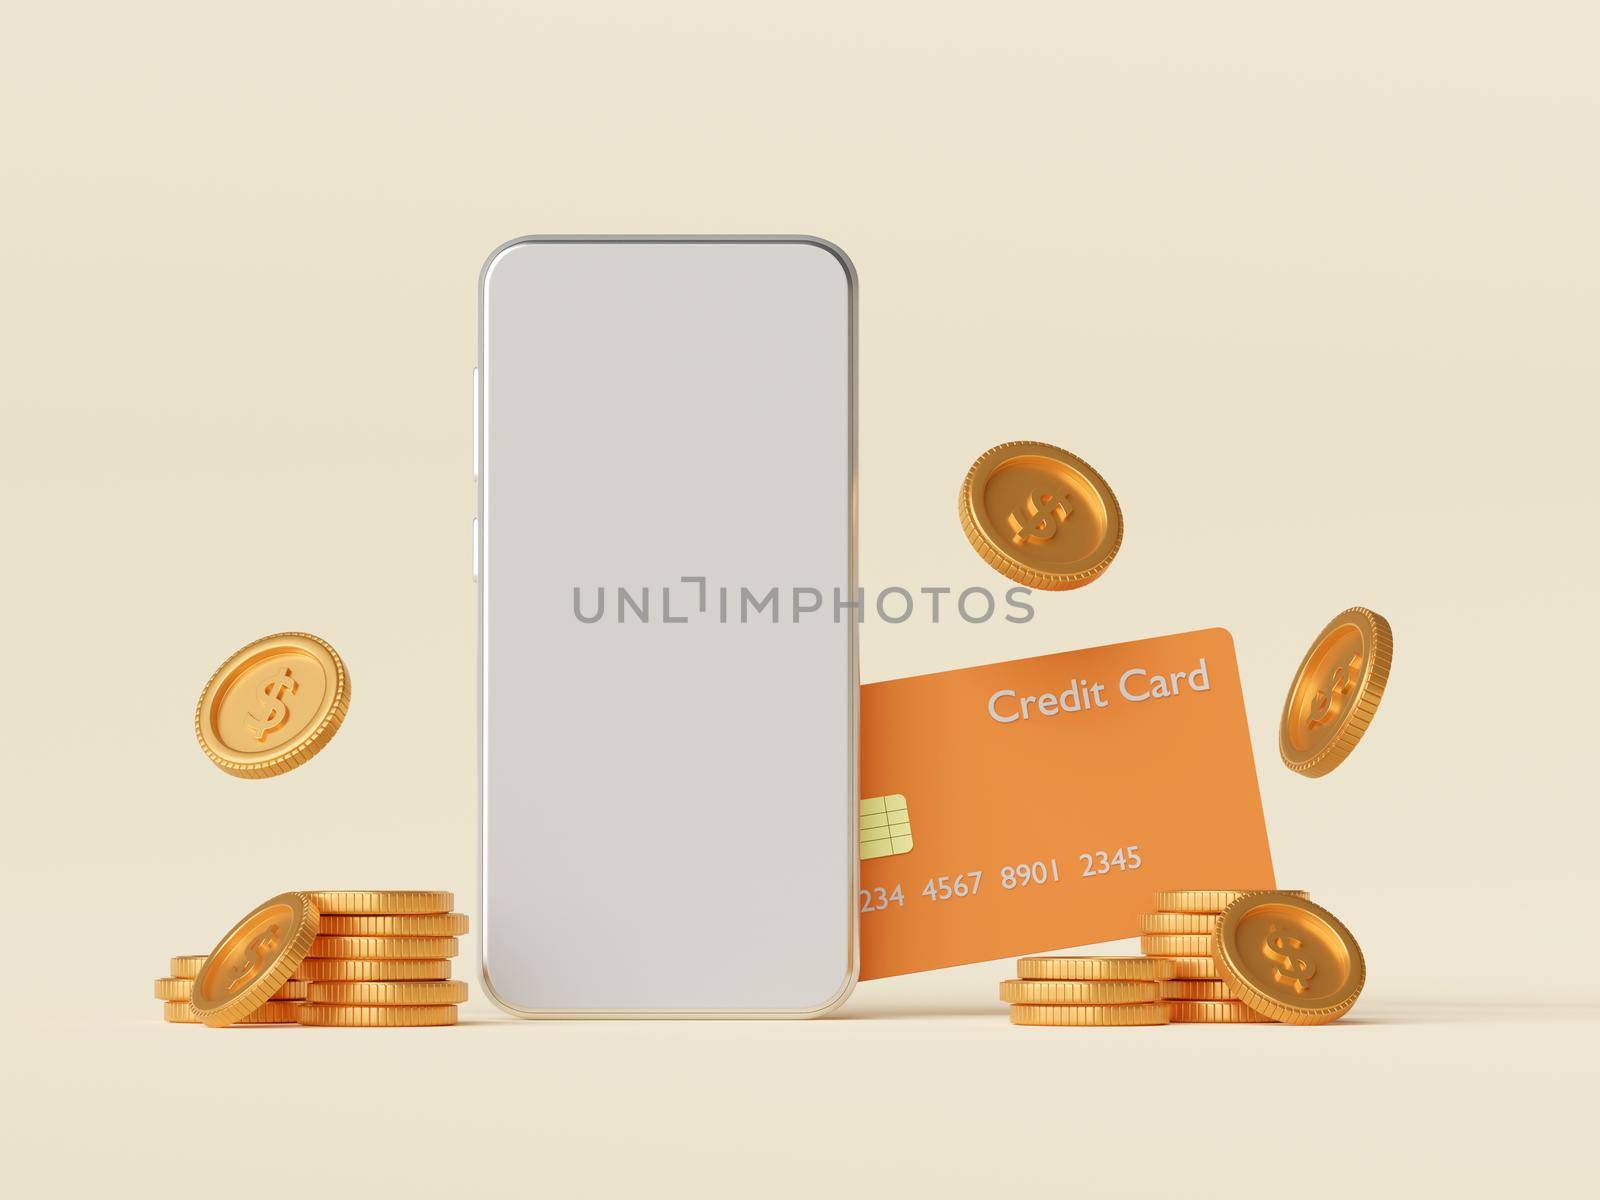 3d illustration of smartphone mockup with creditcard and dollar coin by nutzchotwarut